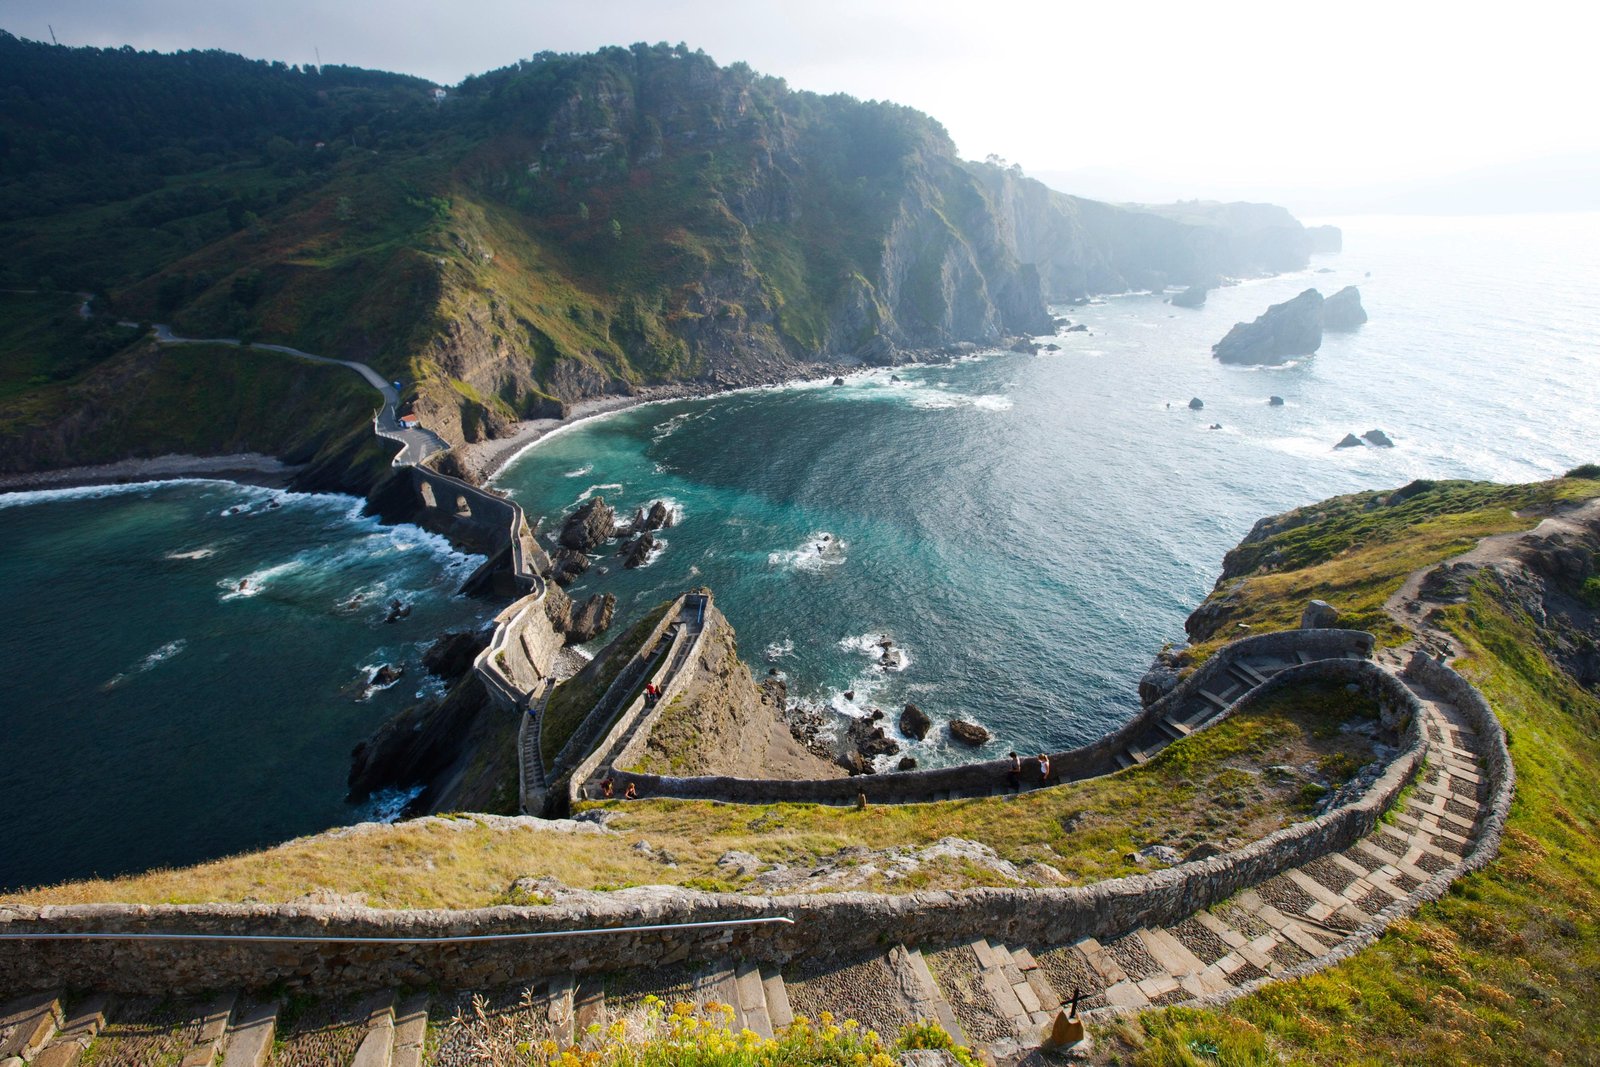 237 steps down to the ocean on the island of San Juan de Gaztelugatxe, in the Basque Country region of Spain